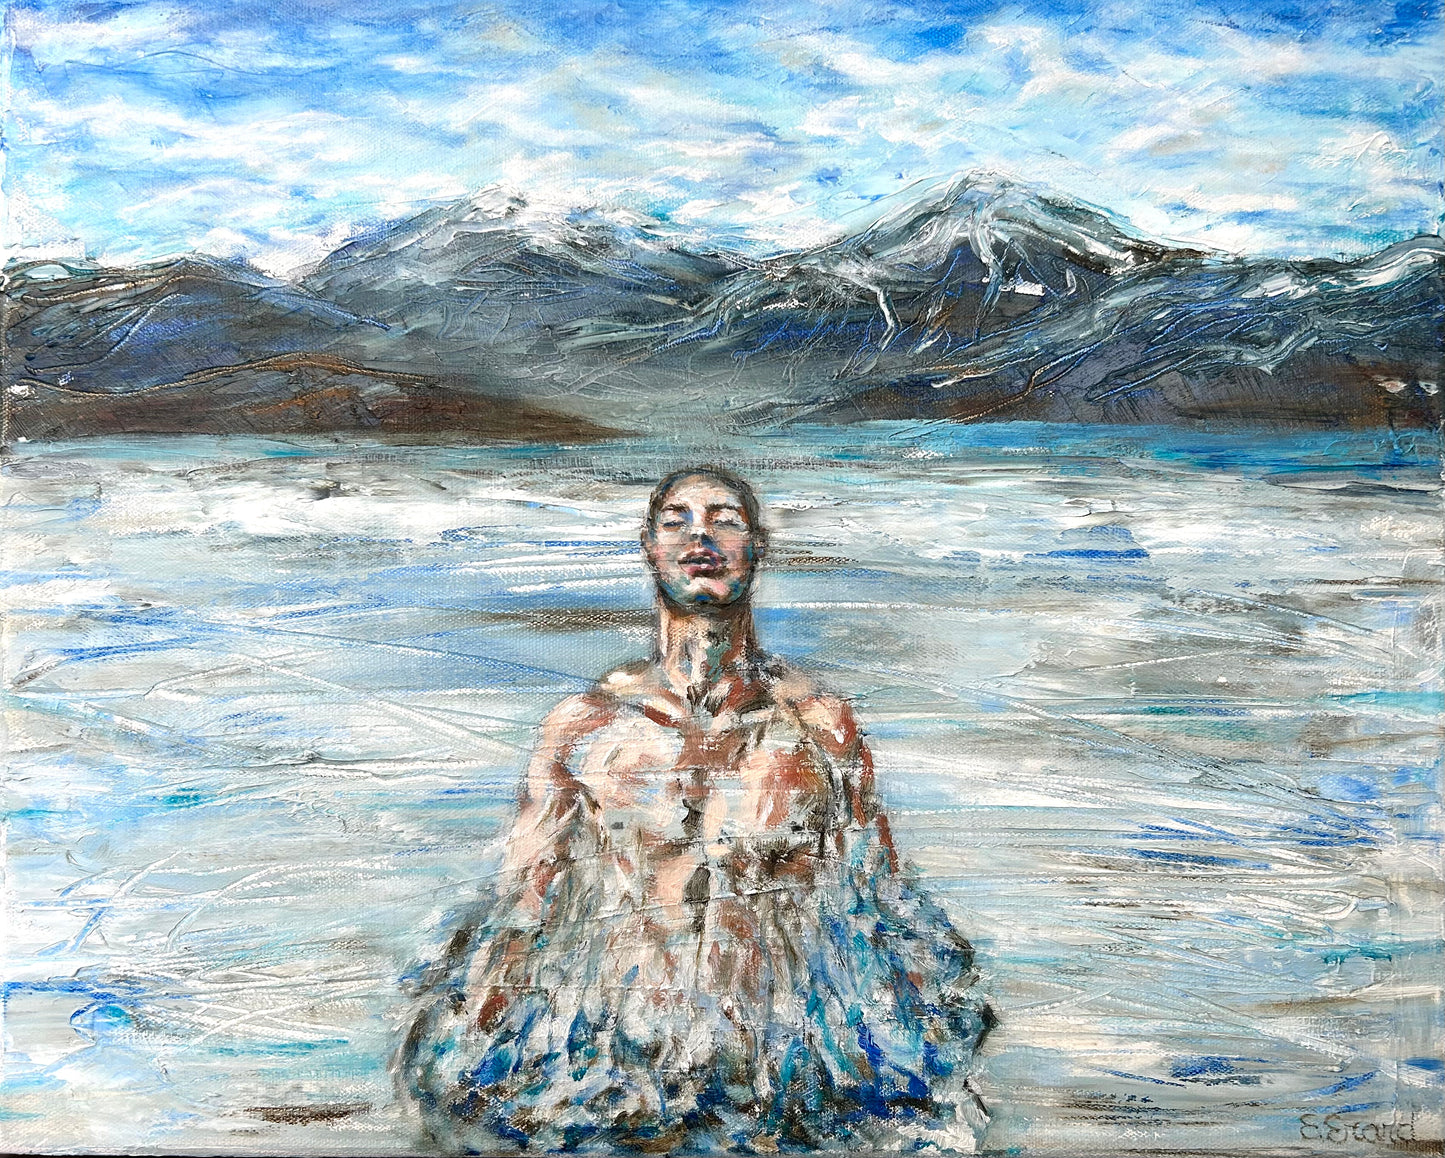 Man and Ice - original oil painting